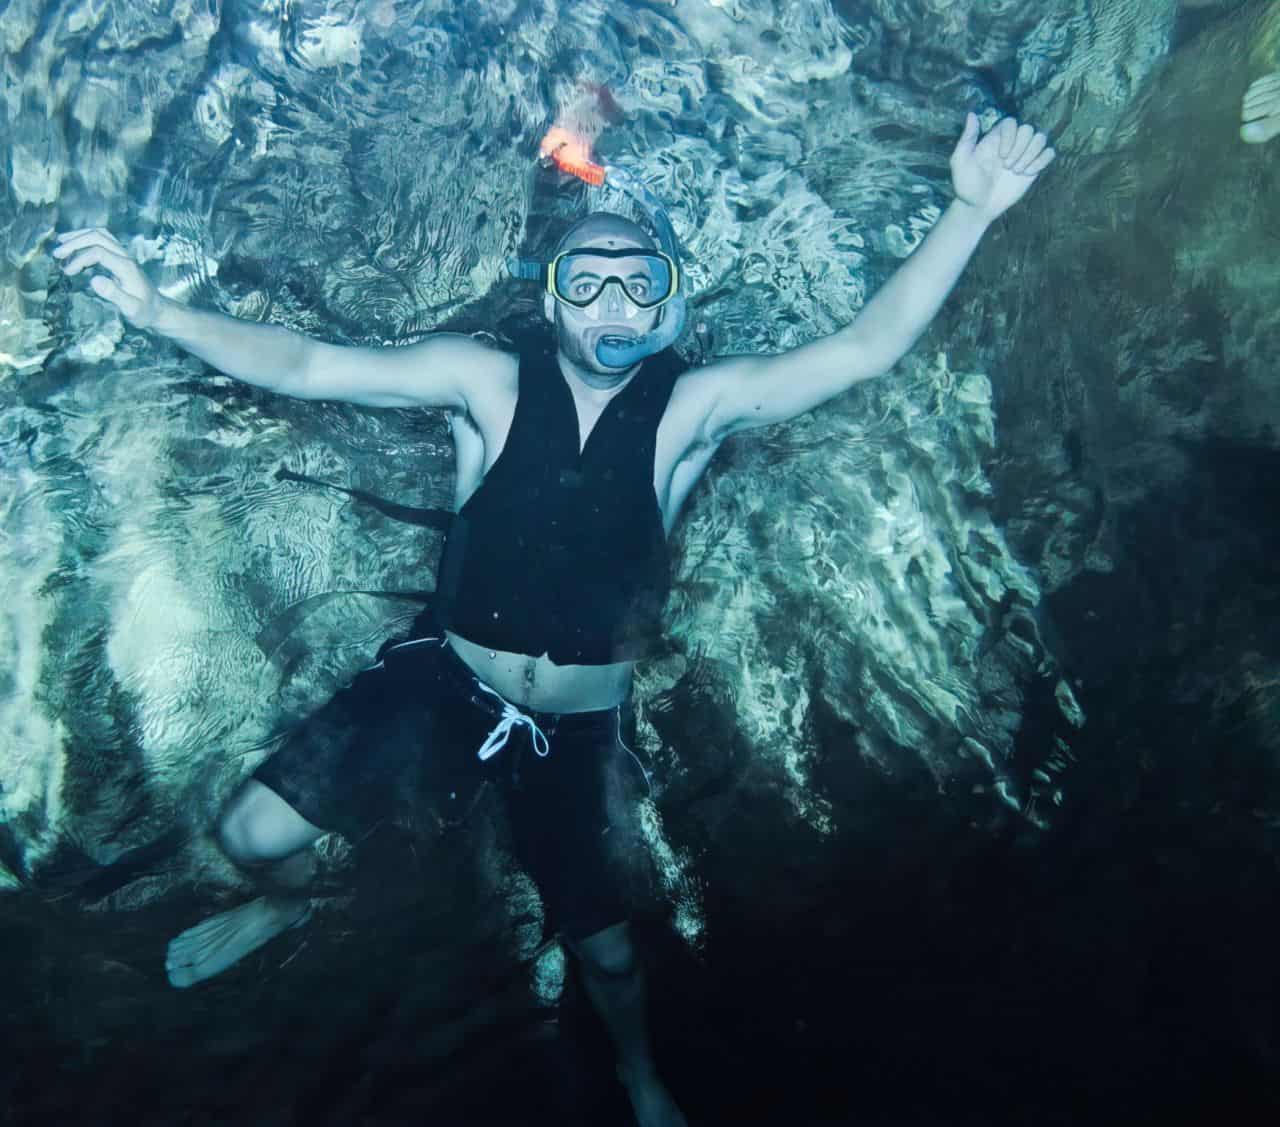 jason in a cave